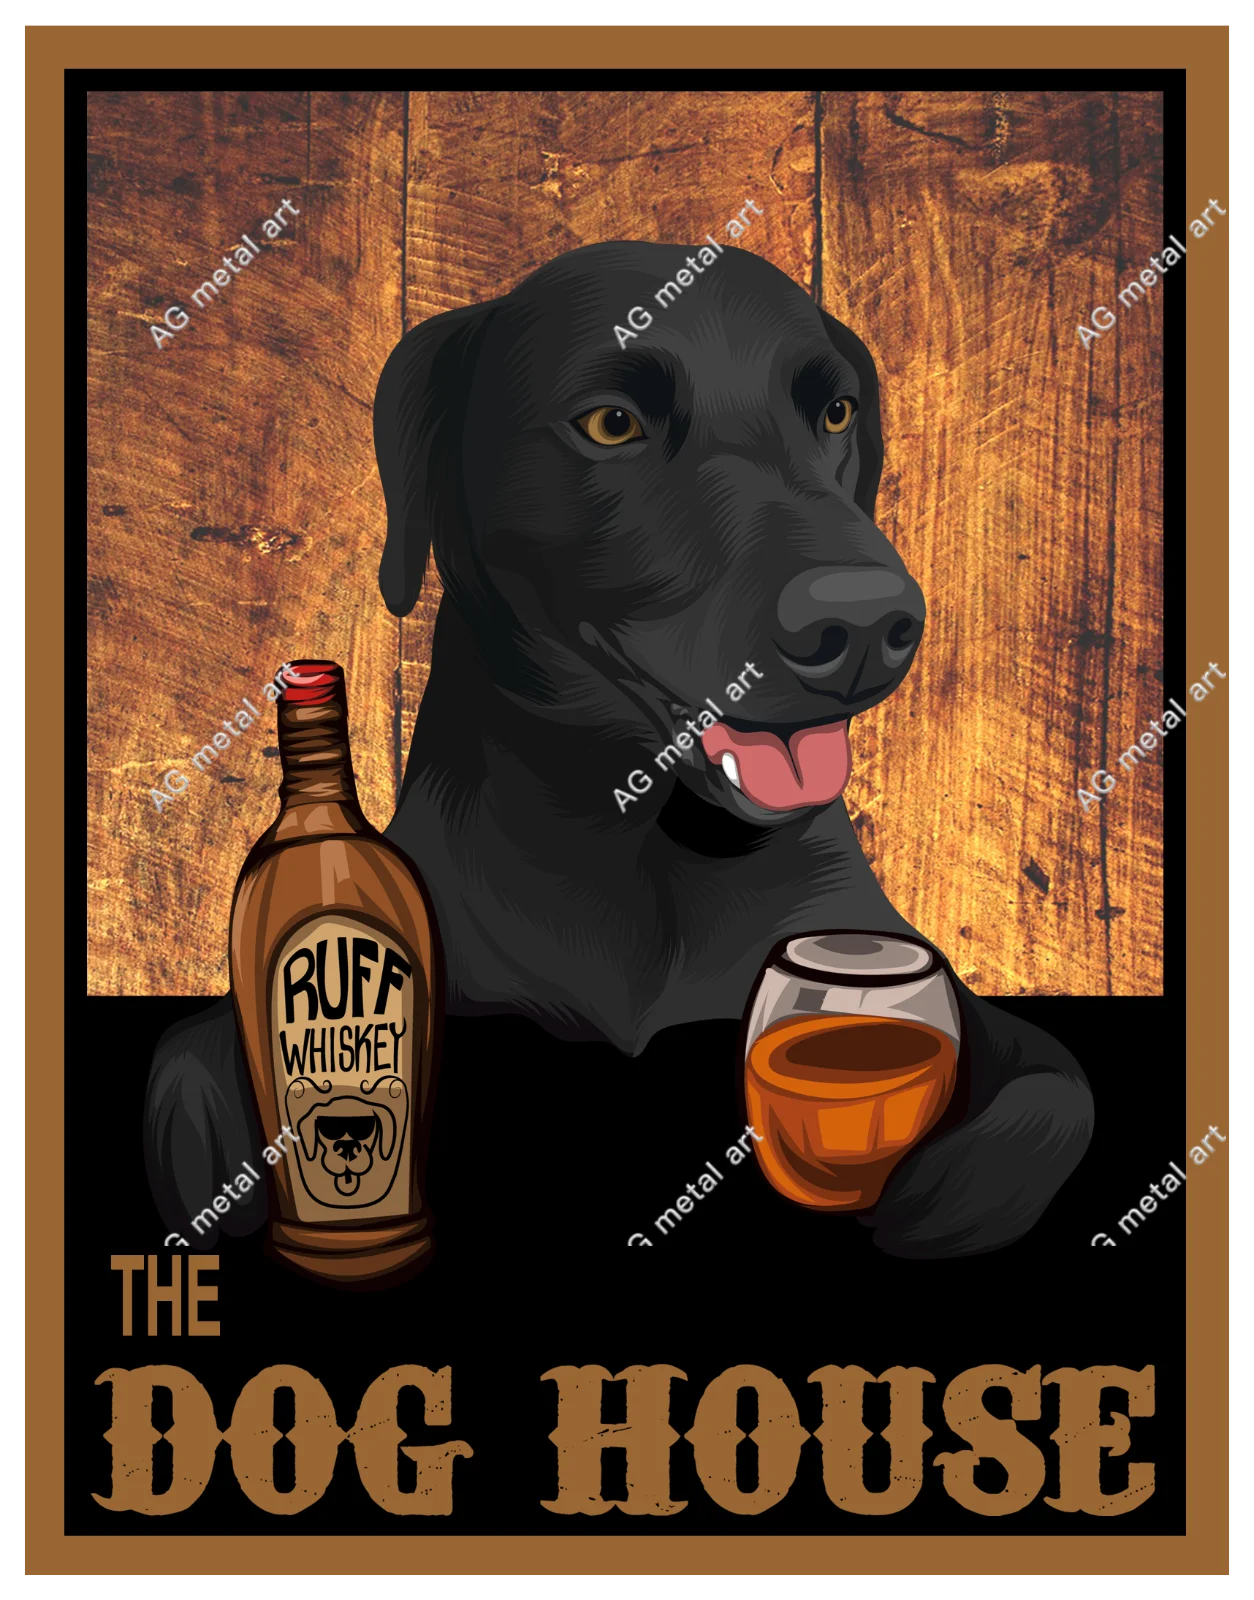 

Vintage The Dog House Various Breeds Pub Sign for Home Bar or Man Cave Room Decor Posters Metal Wall Decor